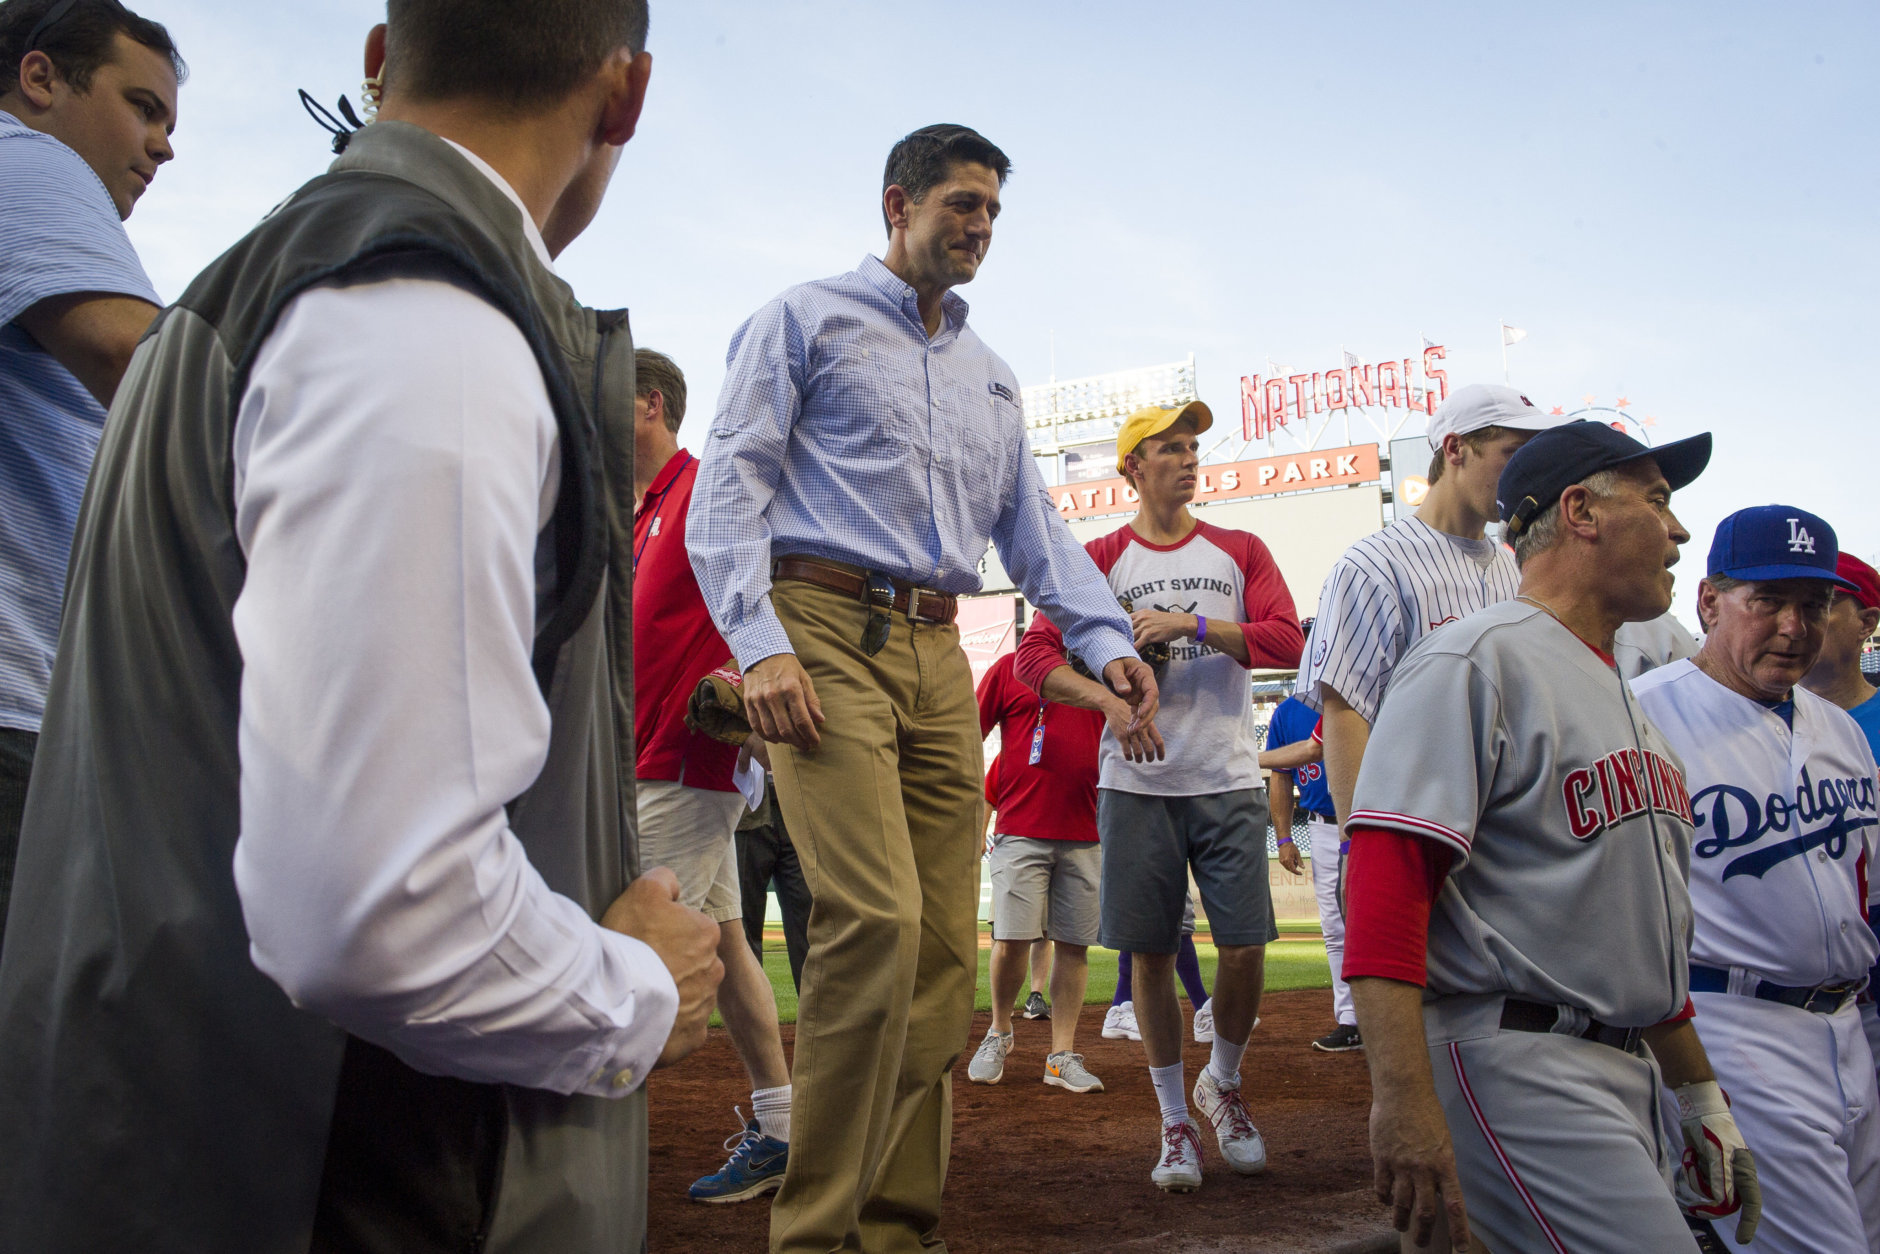 Speaker of the House Paul Ryan, of Wisconsin, walks into the Republican team dugout at the start of the 57th Congressional Baseball Game at National's Park in Washington, Thursday, June 14, 2018. On June 14, 2017, Congressional members were victims of a shooting at the baseball field they were practicing on in Alexandria, Va. (AP Photo/Cliff Owen)